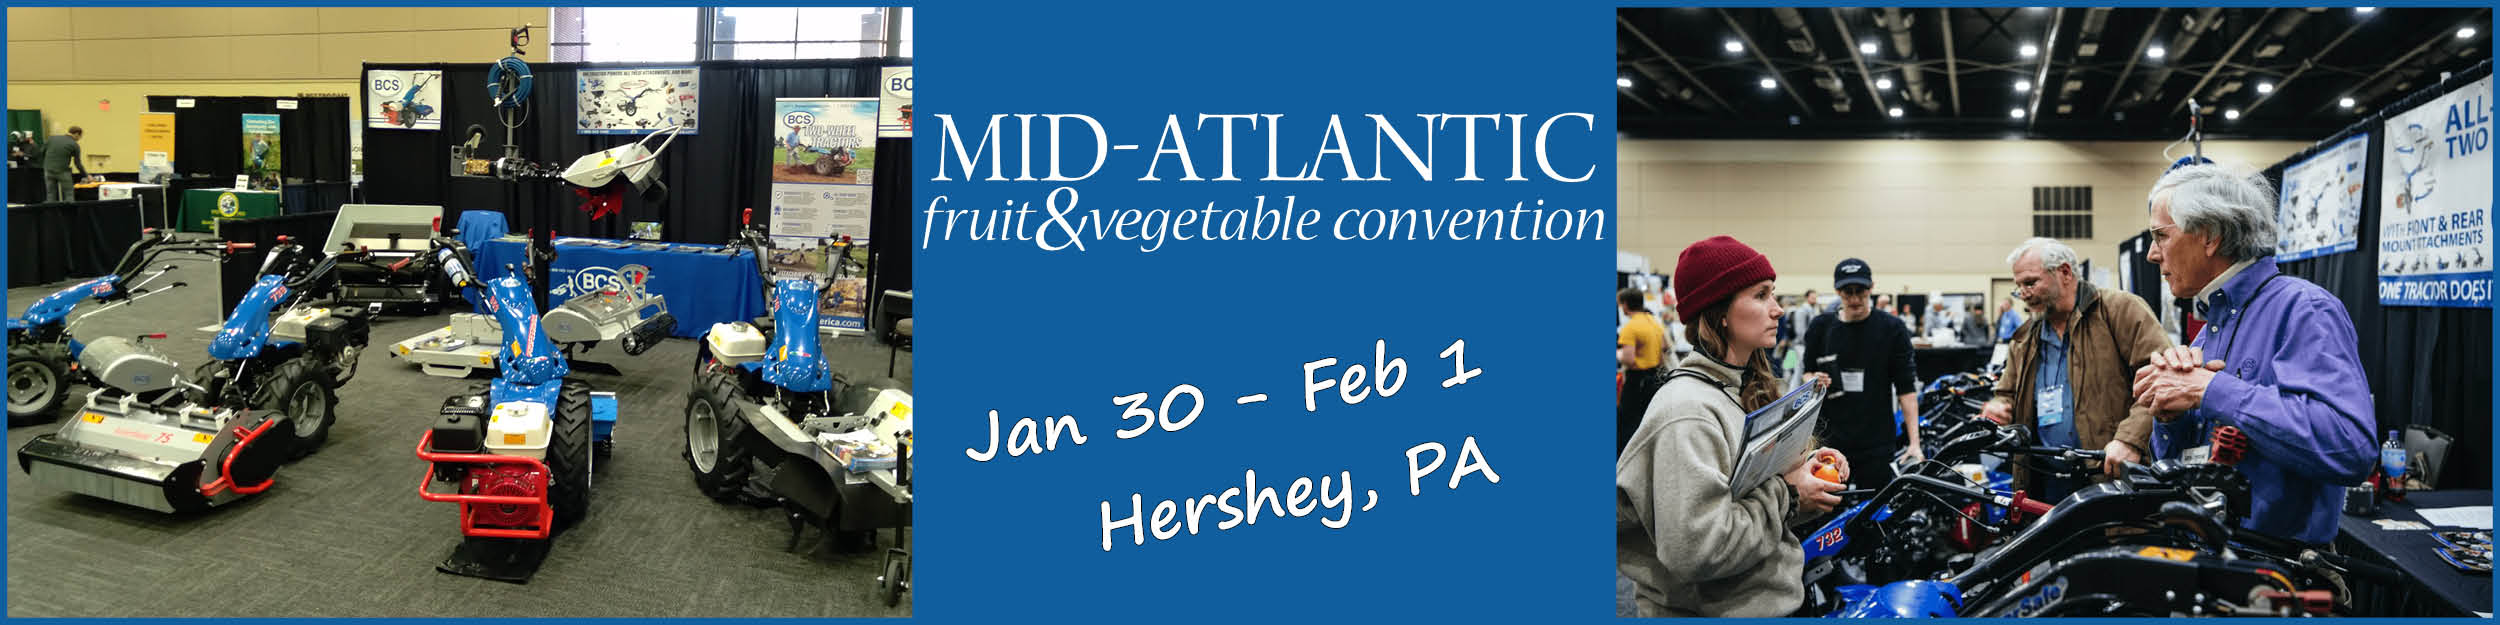 Mid-Atlantic Fruit and Vegetable Convention - Hershey, PA